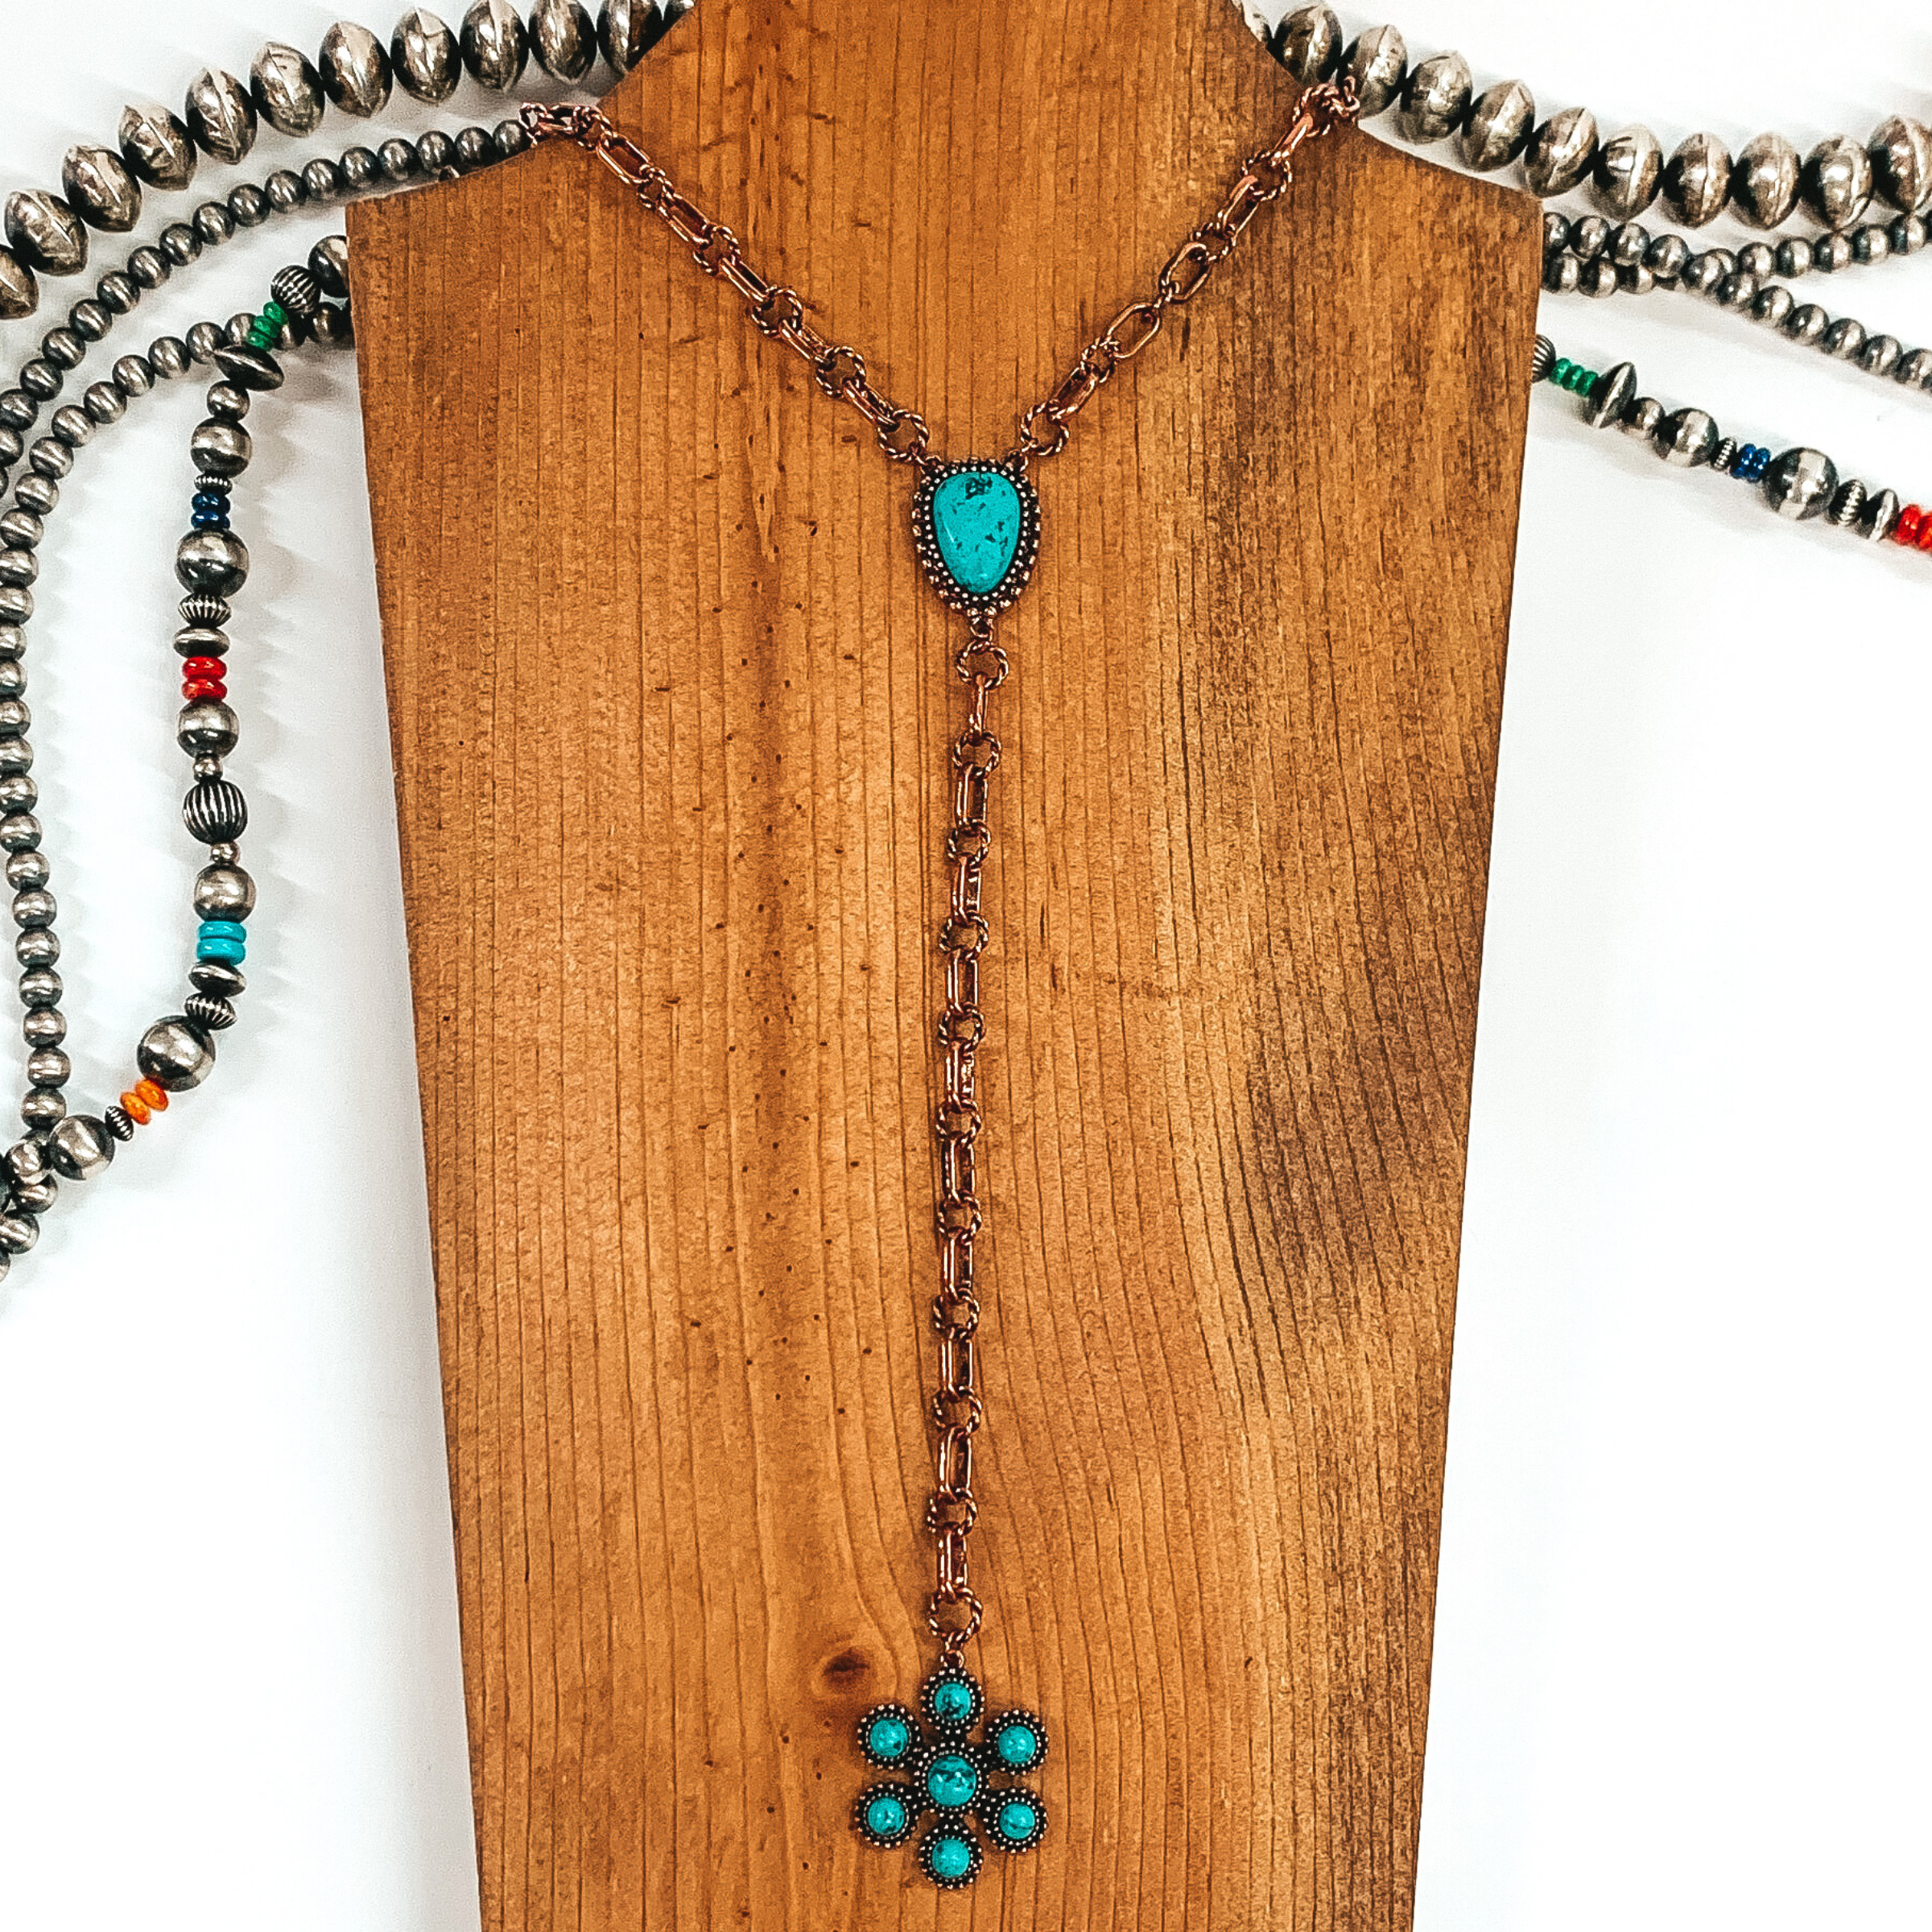 Copper chained necklace that is Navajo inspired with a turquoise irregular stoned pendant. Then hanging from the pendant, there is a hanging copper chain with a star burst pendant with turquoise stones. This necklace is pictured on  wood necklace holder on a white background. It has different shaped and colored Navajo strands. 